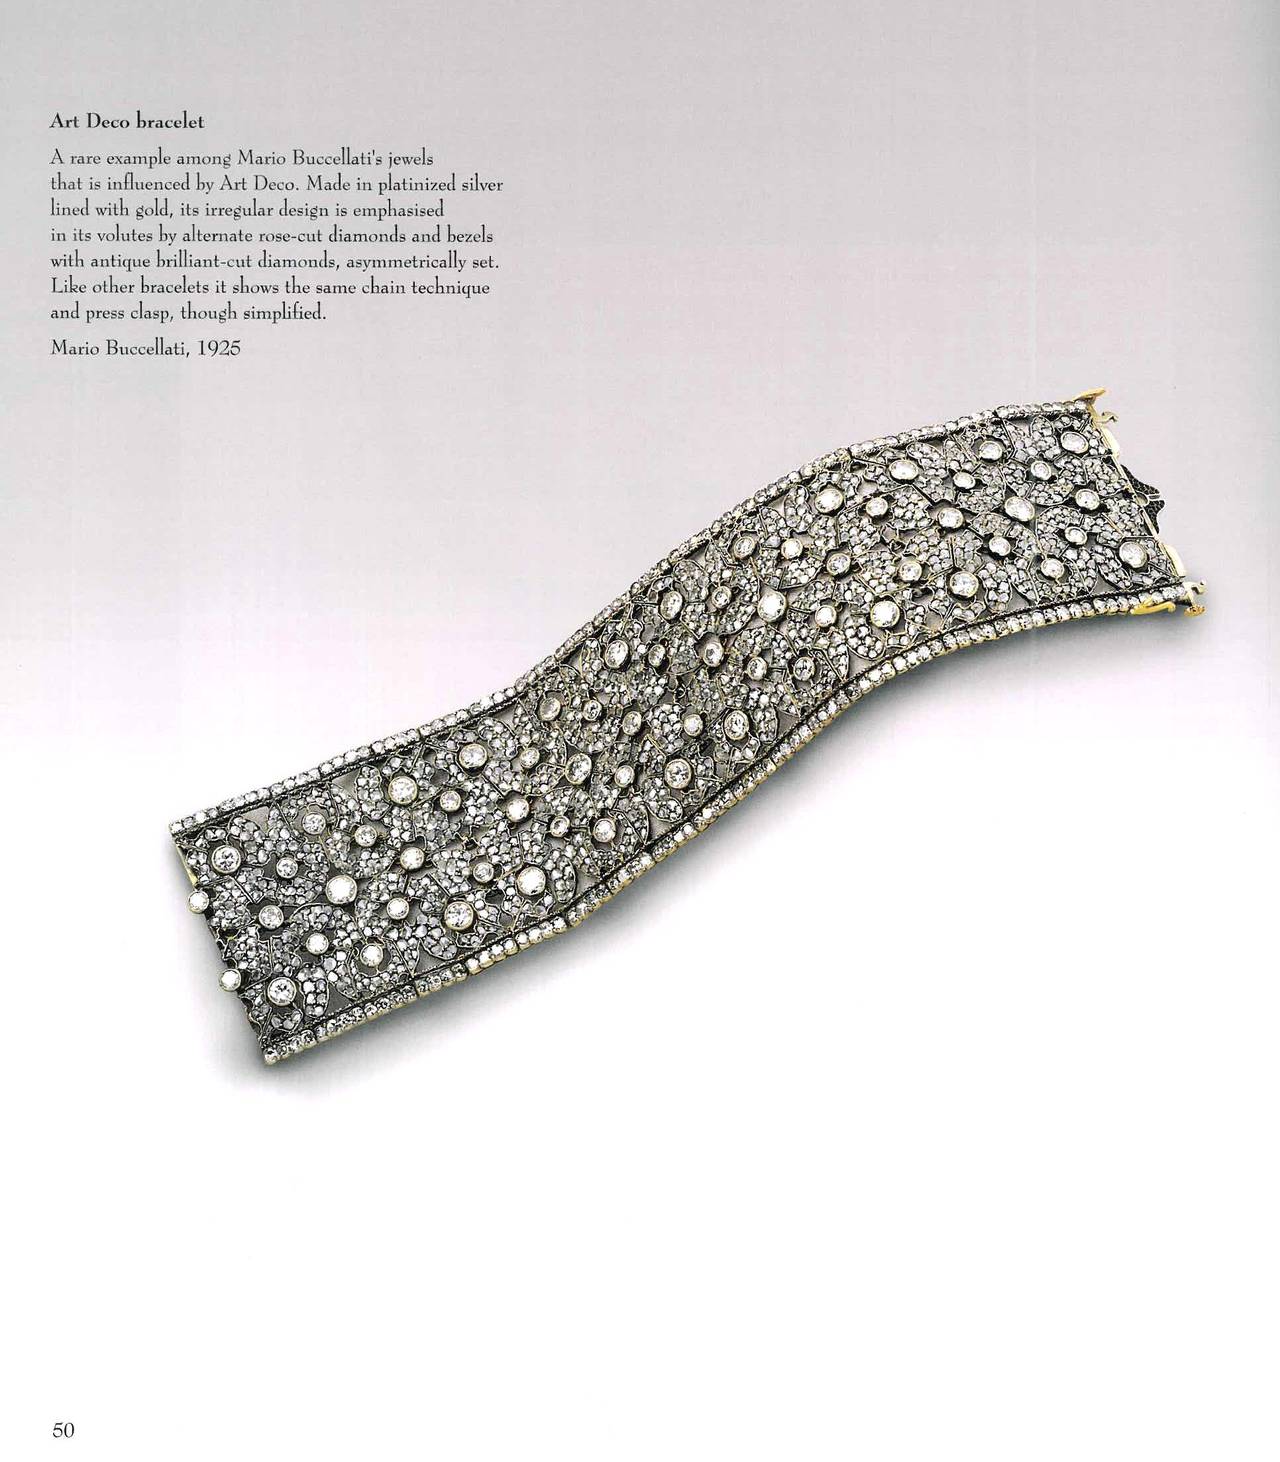 Book in soft covers published in 2008 to coincide with an exhibition at The Moscow Kremlin Museum of jewelry spanning 250 years from the family firm of Buccellati. 200 pages with 150 colour photographs including a number of fold-outs including